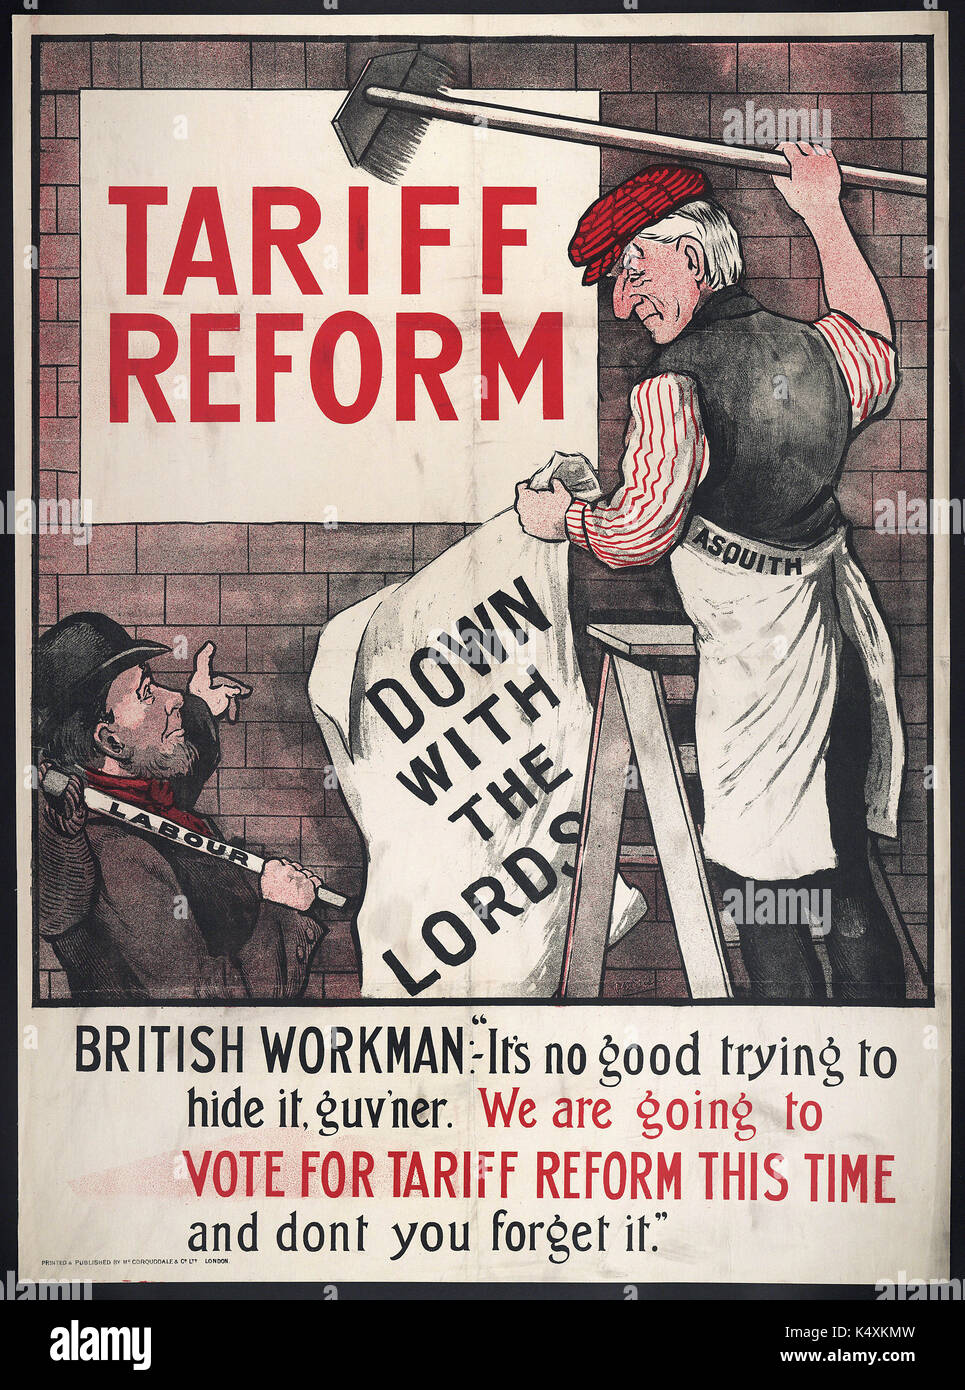 British Workman  It's no use trying to hide it, guv'ner. We are going to vote for Tariff Reform...  - British Political Posters, c1905-c1910 Stock Photo